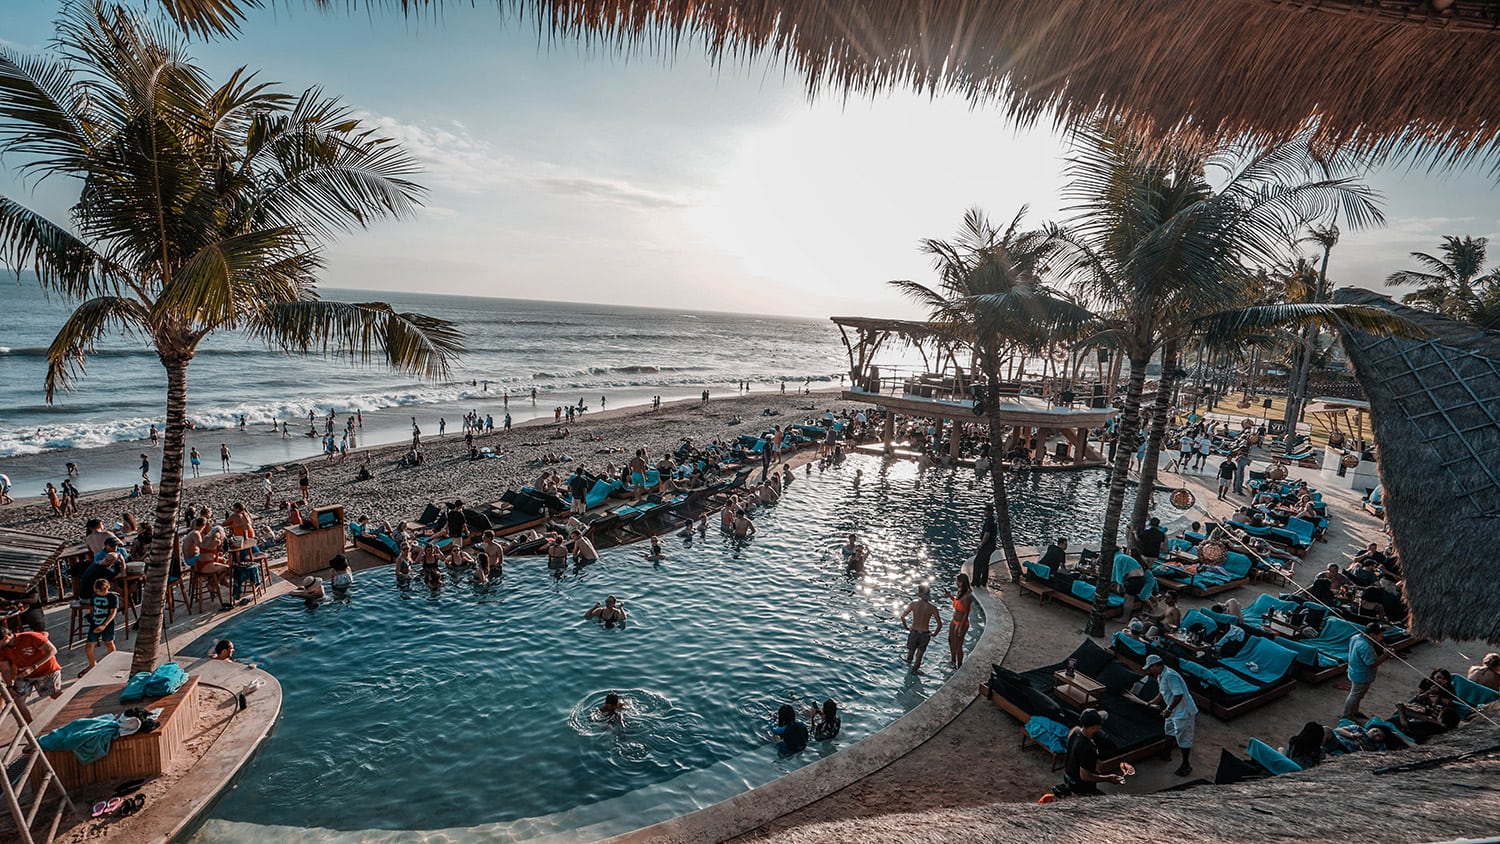 10 Beach Clubs in Bali With Amazing Pools And Party Vibes